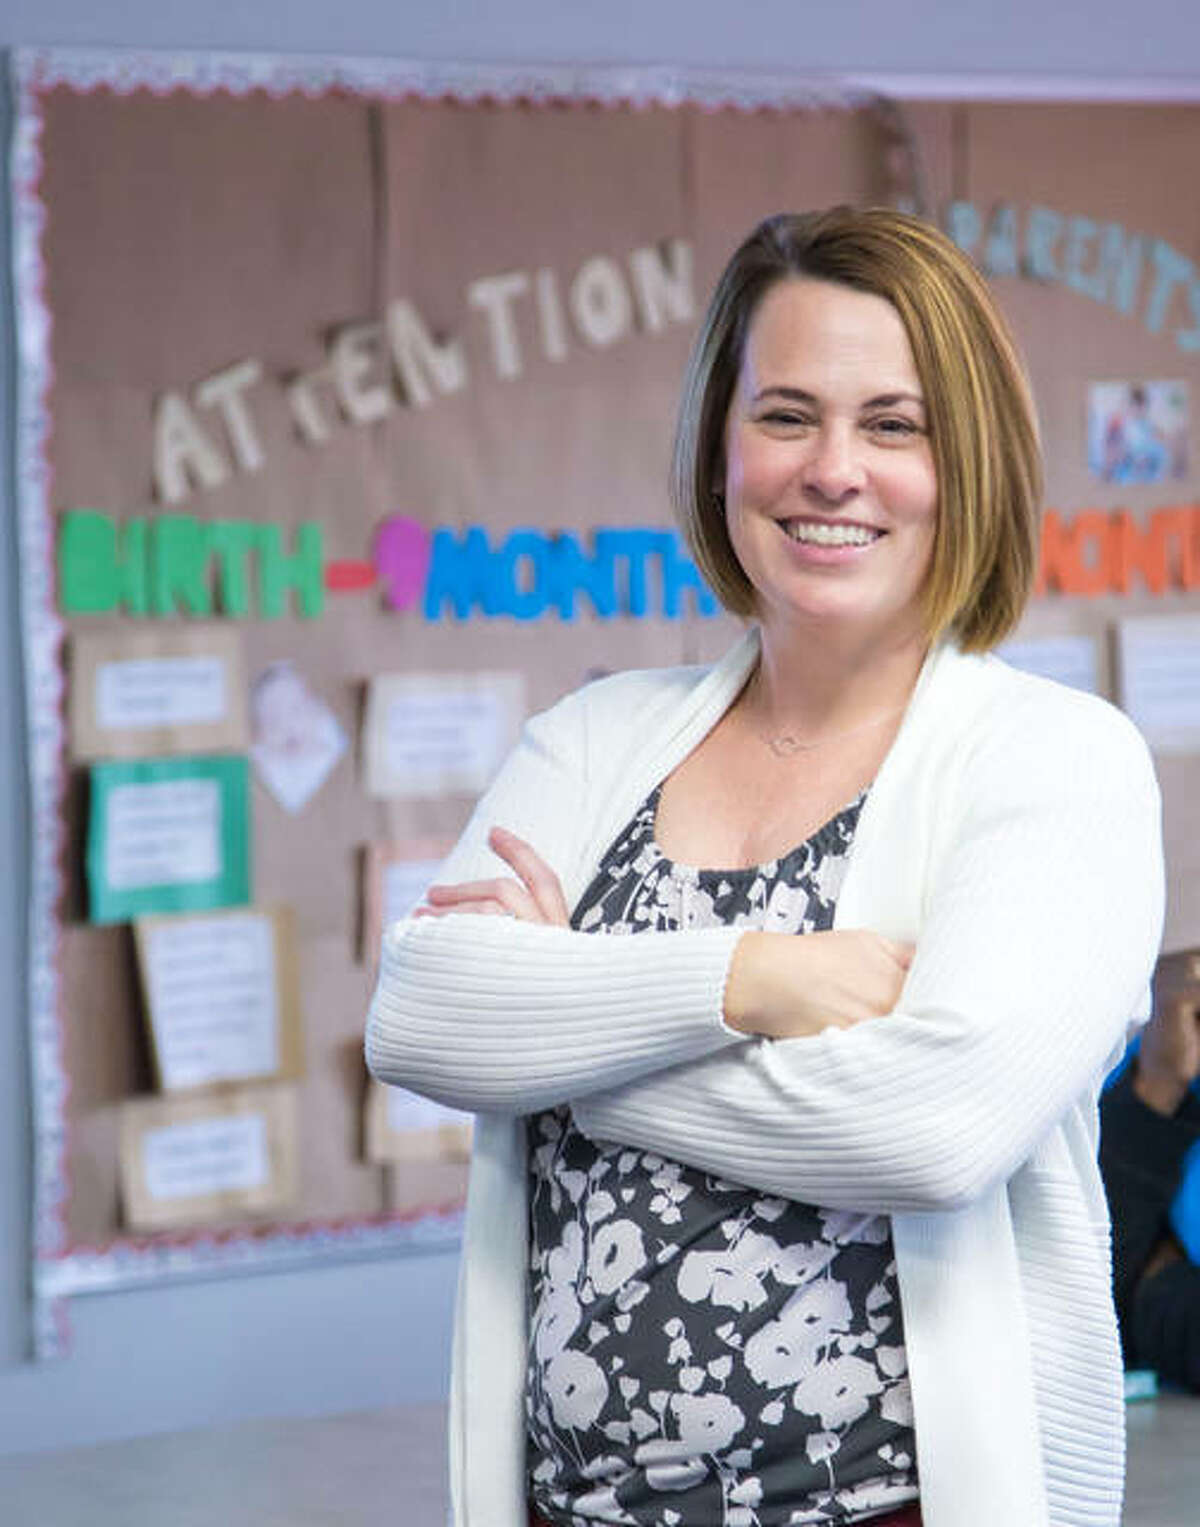 L&C Early Childhood Education Professor and Coordinator Melissa Batchelor received the 2018 Concern for Children Award from Kreative Kids Learning Center.